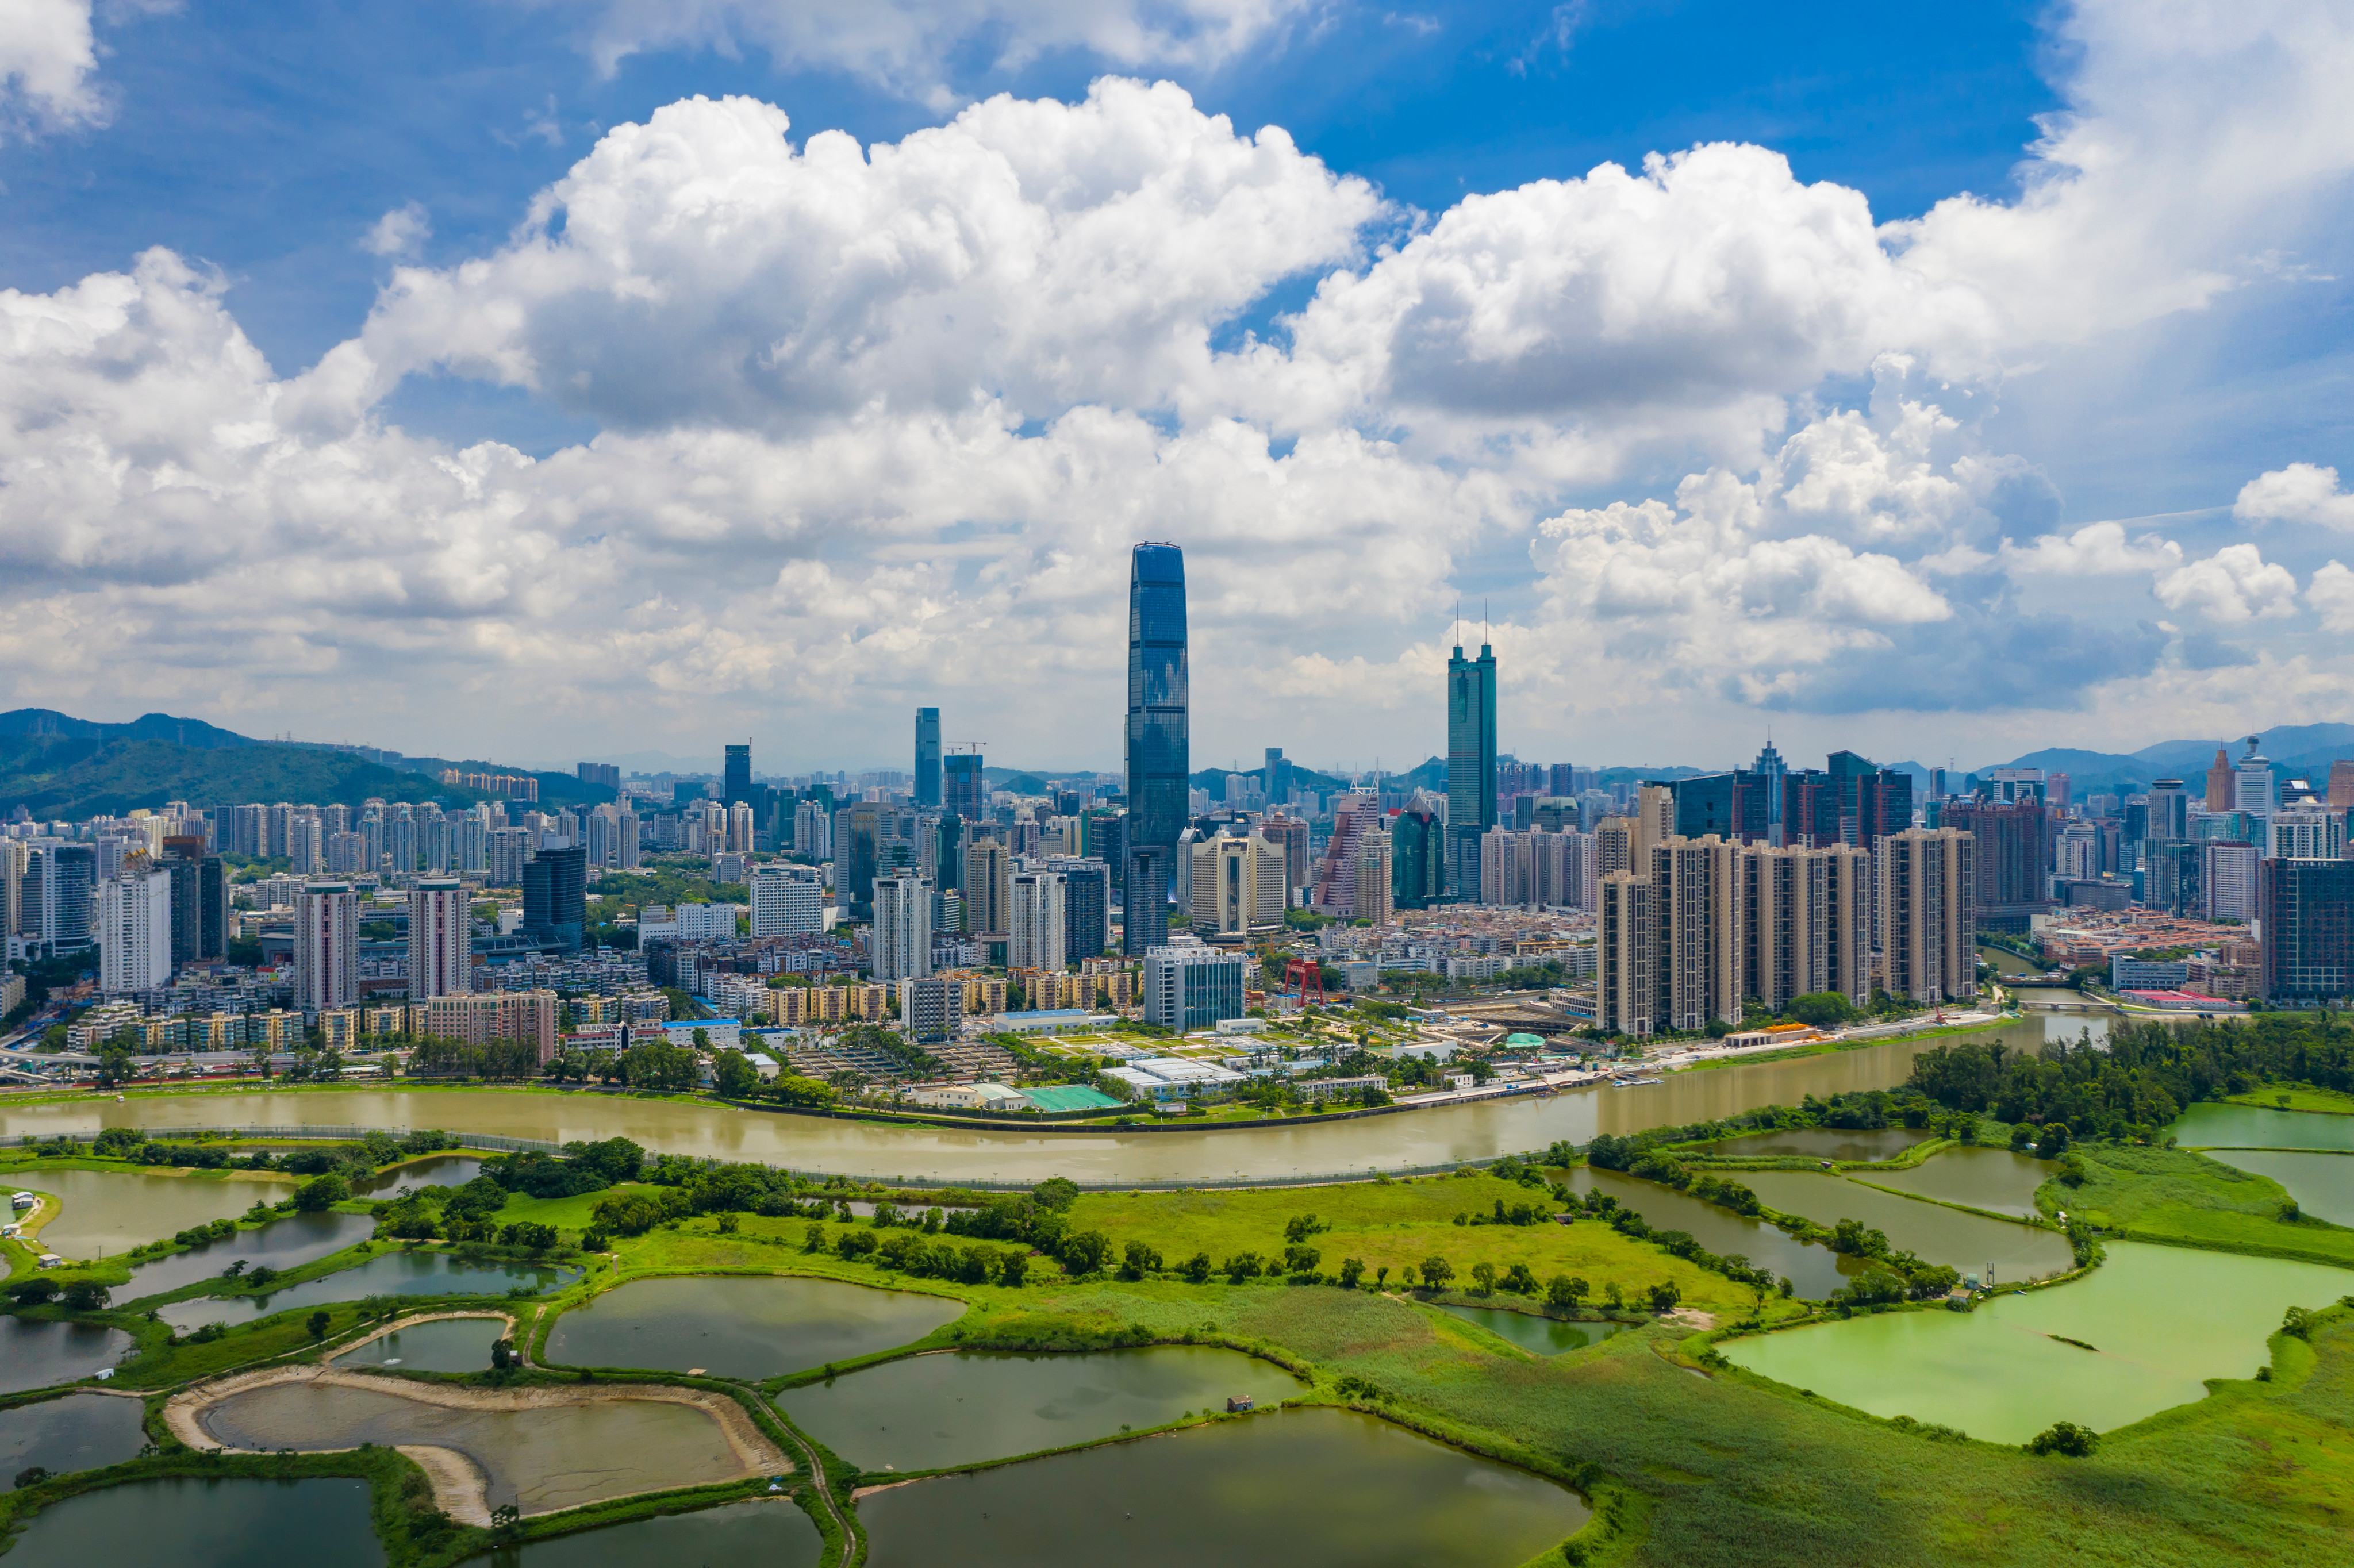 Up to 76 per cent of international firms are planning to expand in southern China’s Greater Bay Area, an HSBC survey shows. Photo: Shutterstock